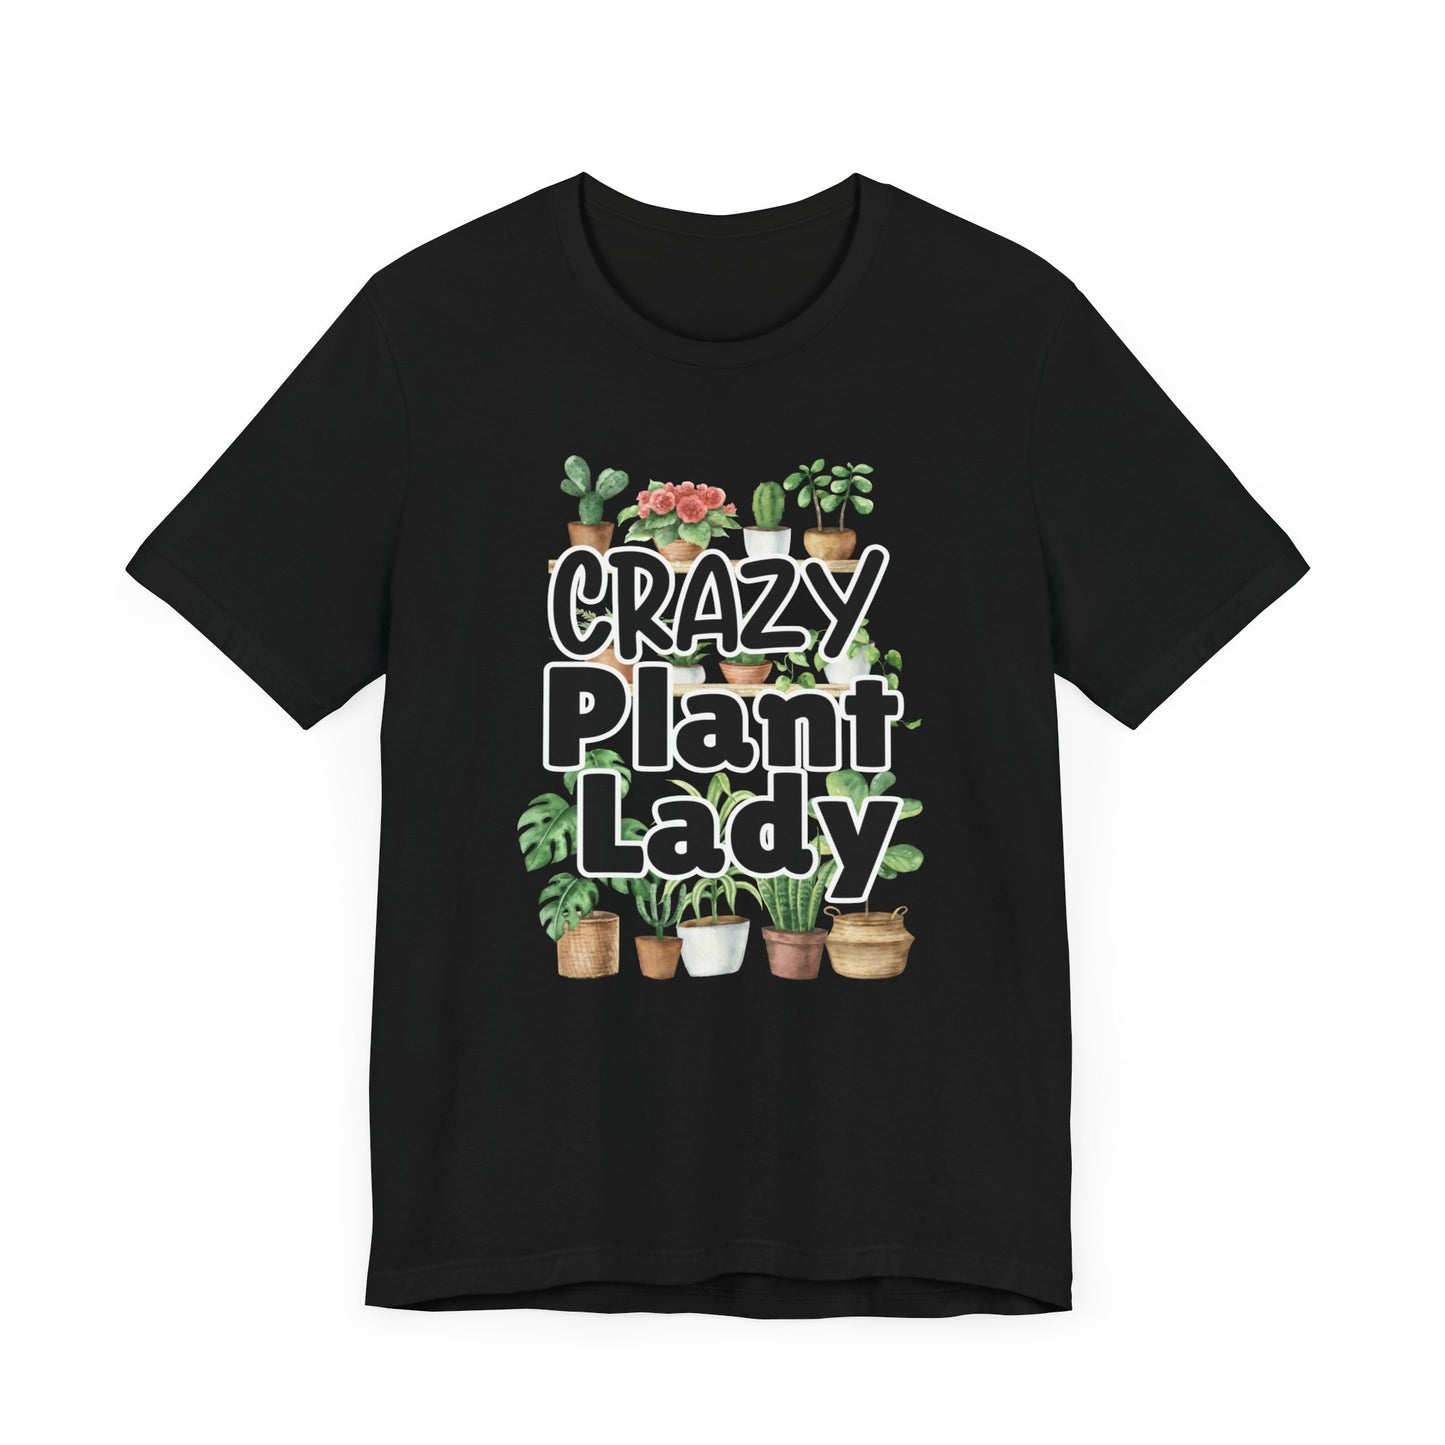 Crazy Plant Lady Shirt Gift for Gardener Shirt for Person who Loves Plants